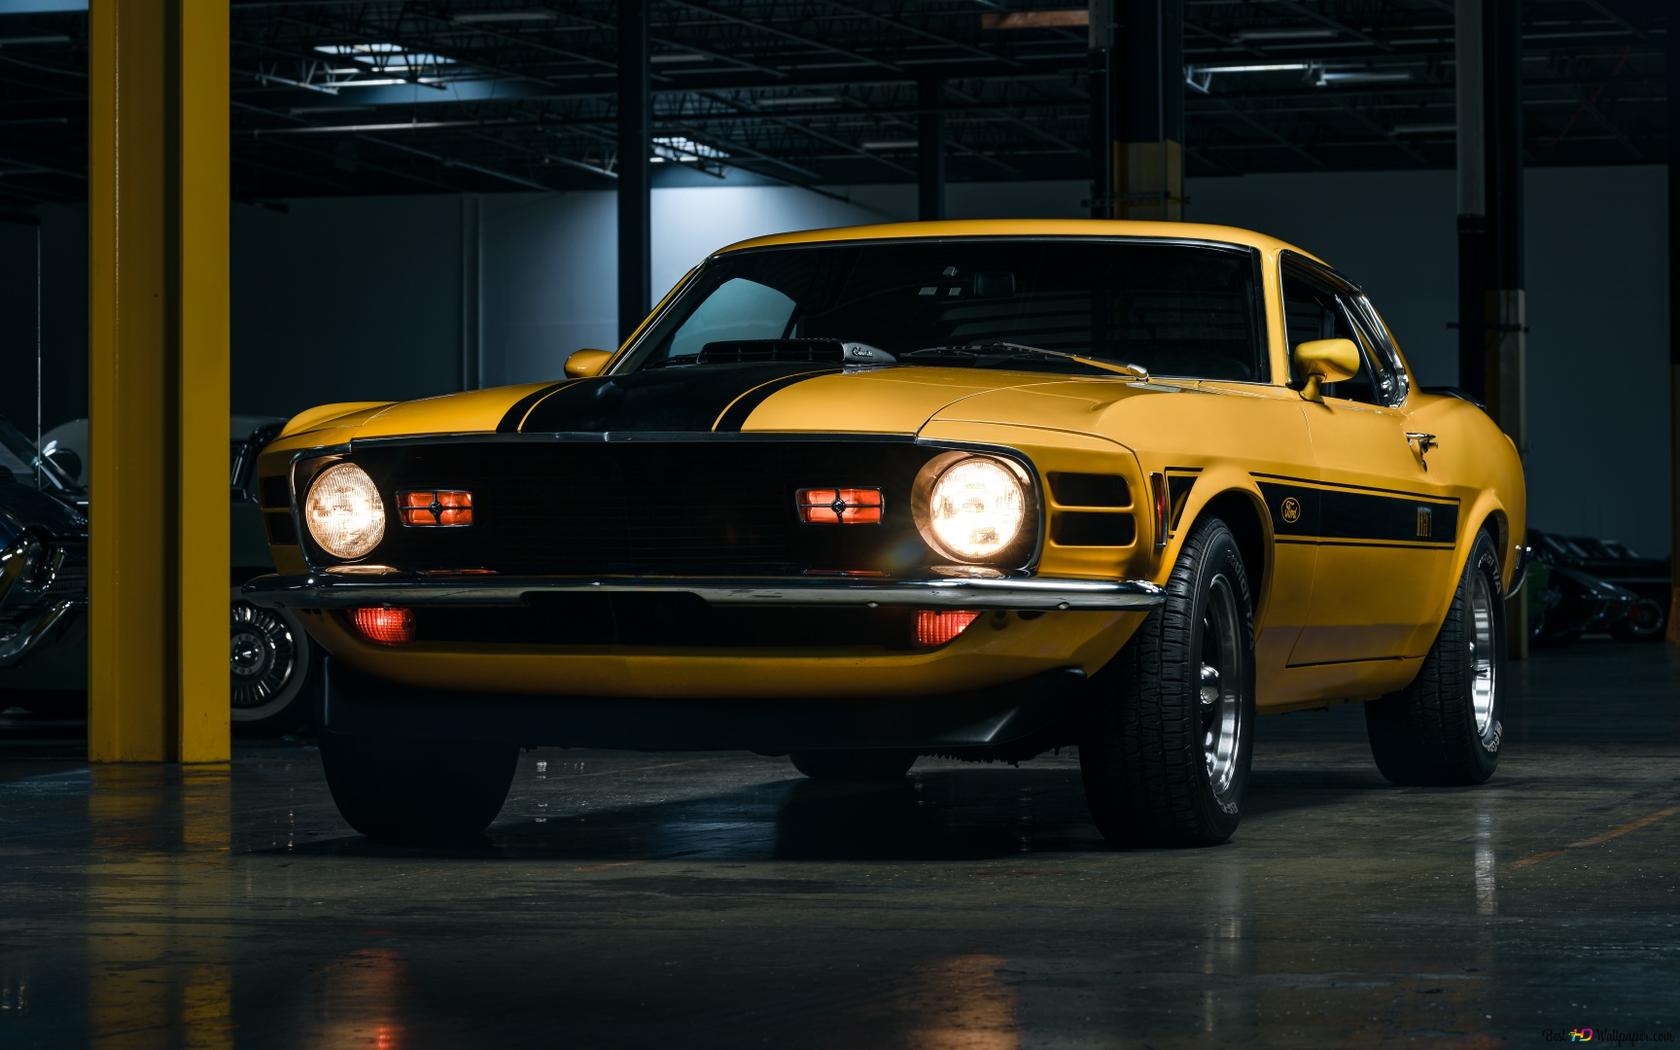 Yellow Ford Mustang Mach 1 HD wallpaper download